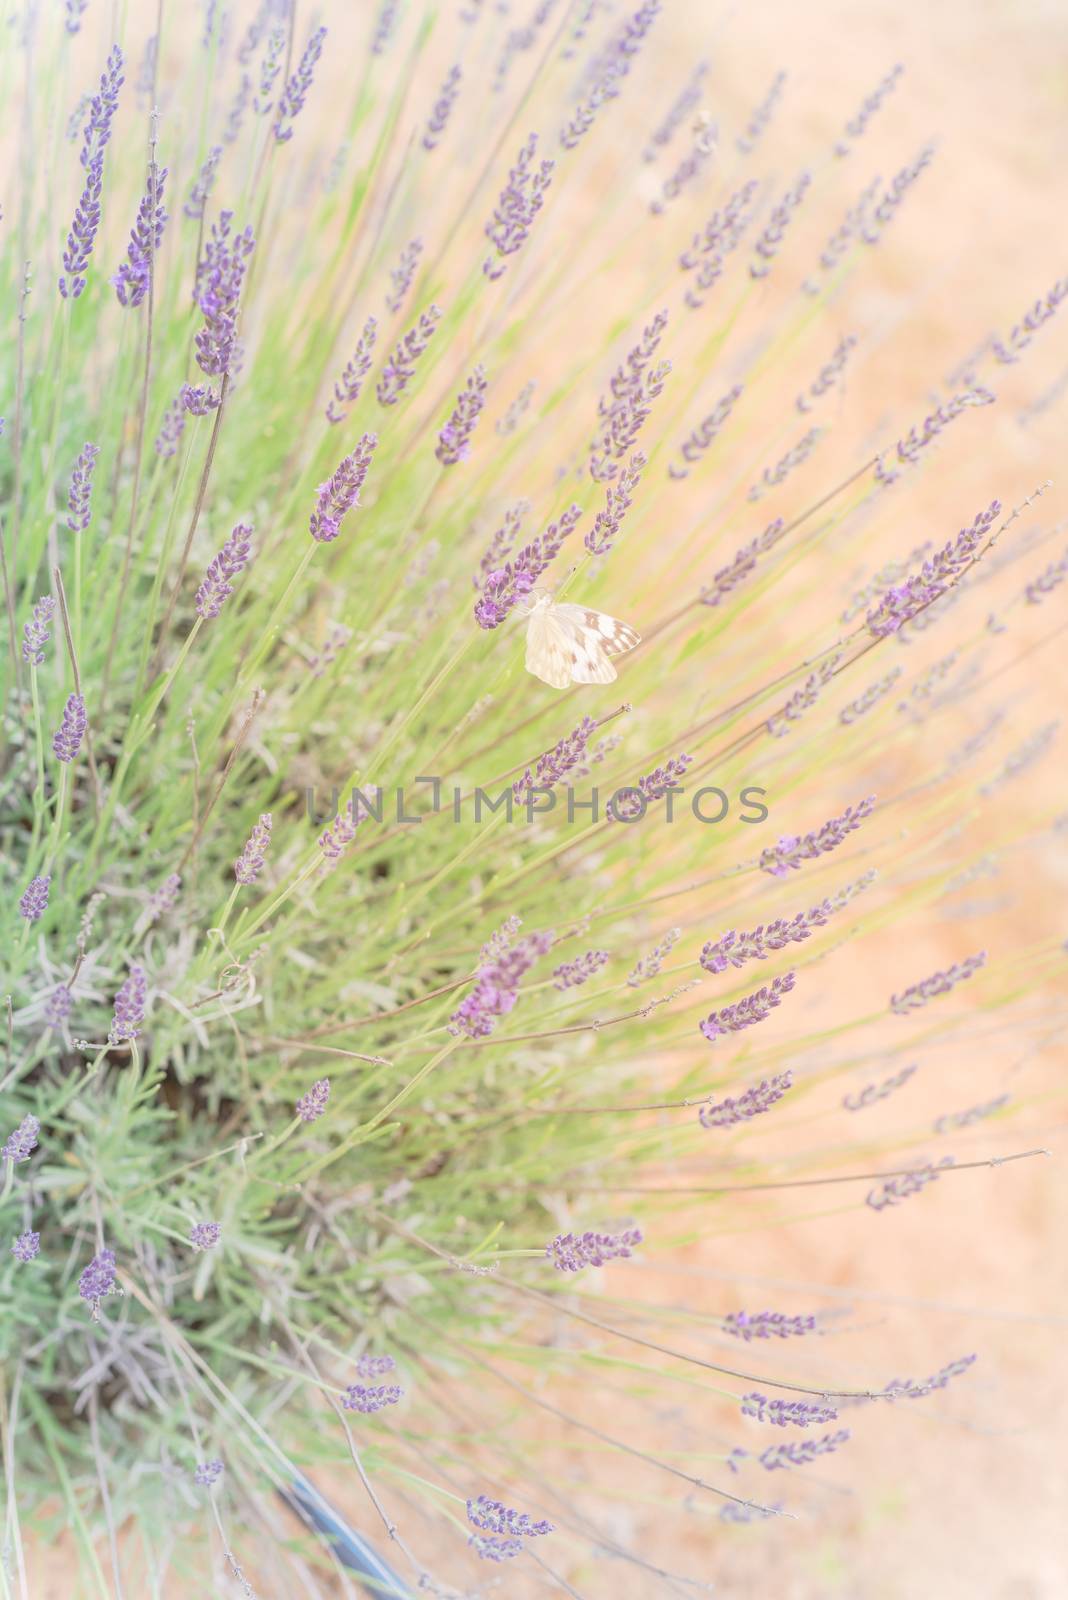 Butterfly on blossom lavender bush at local farm in Texas, America by trongnguyen